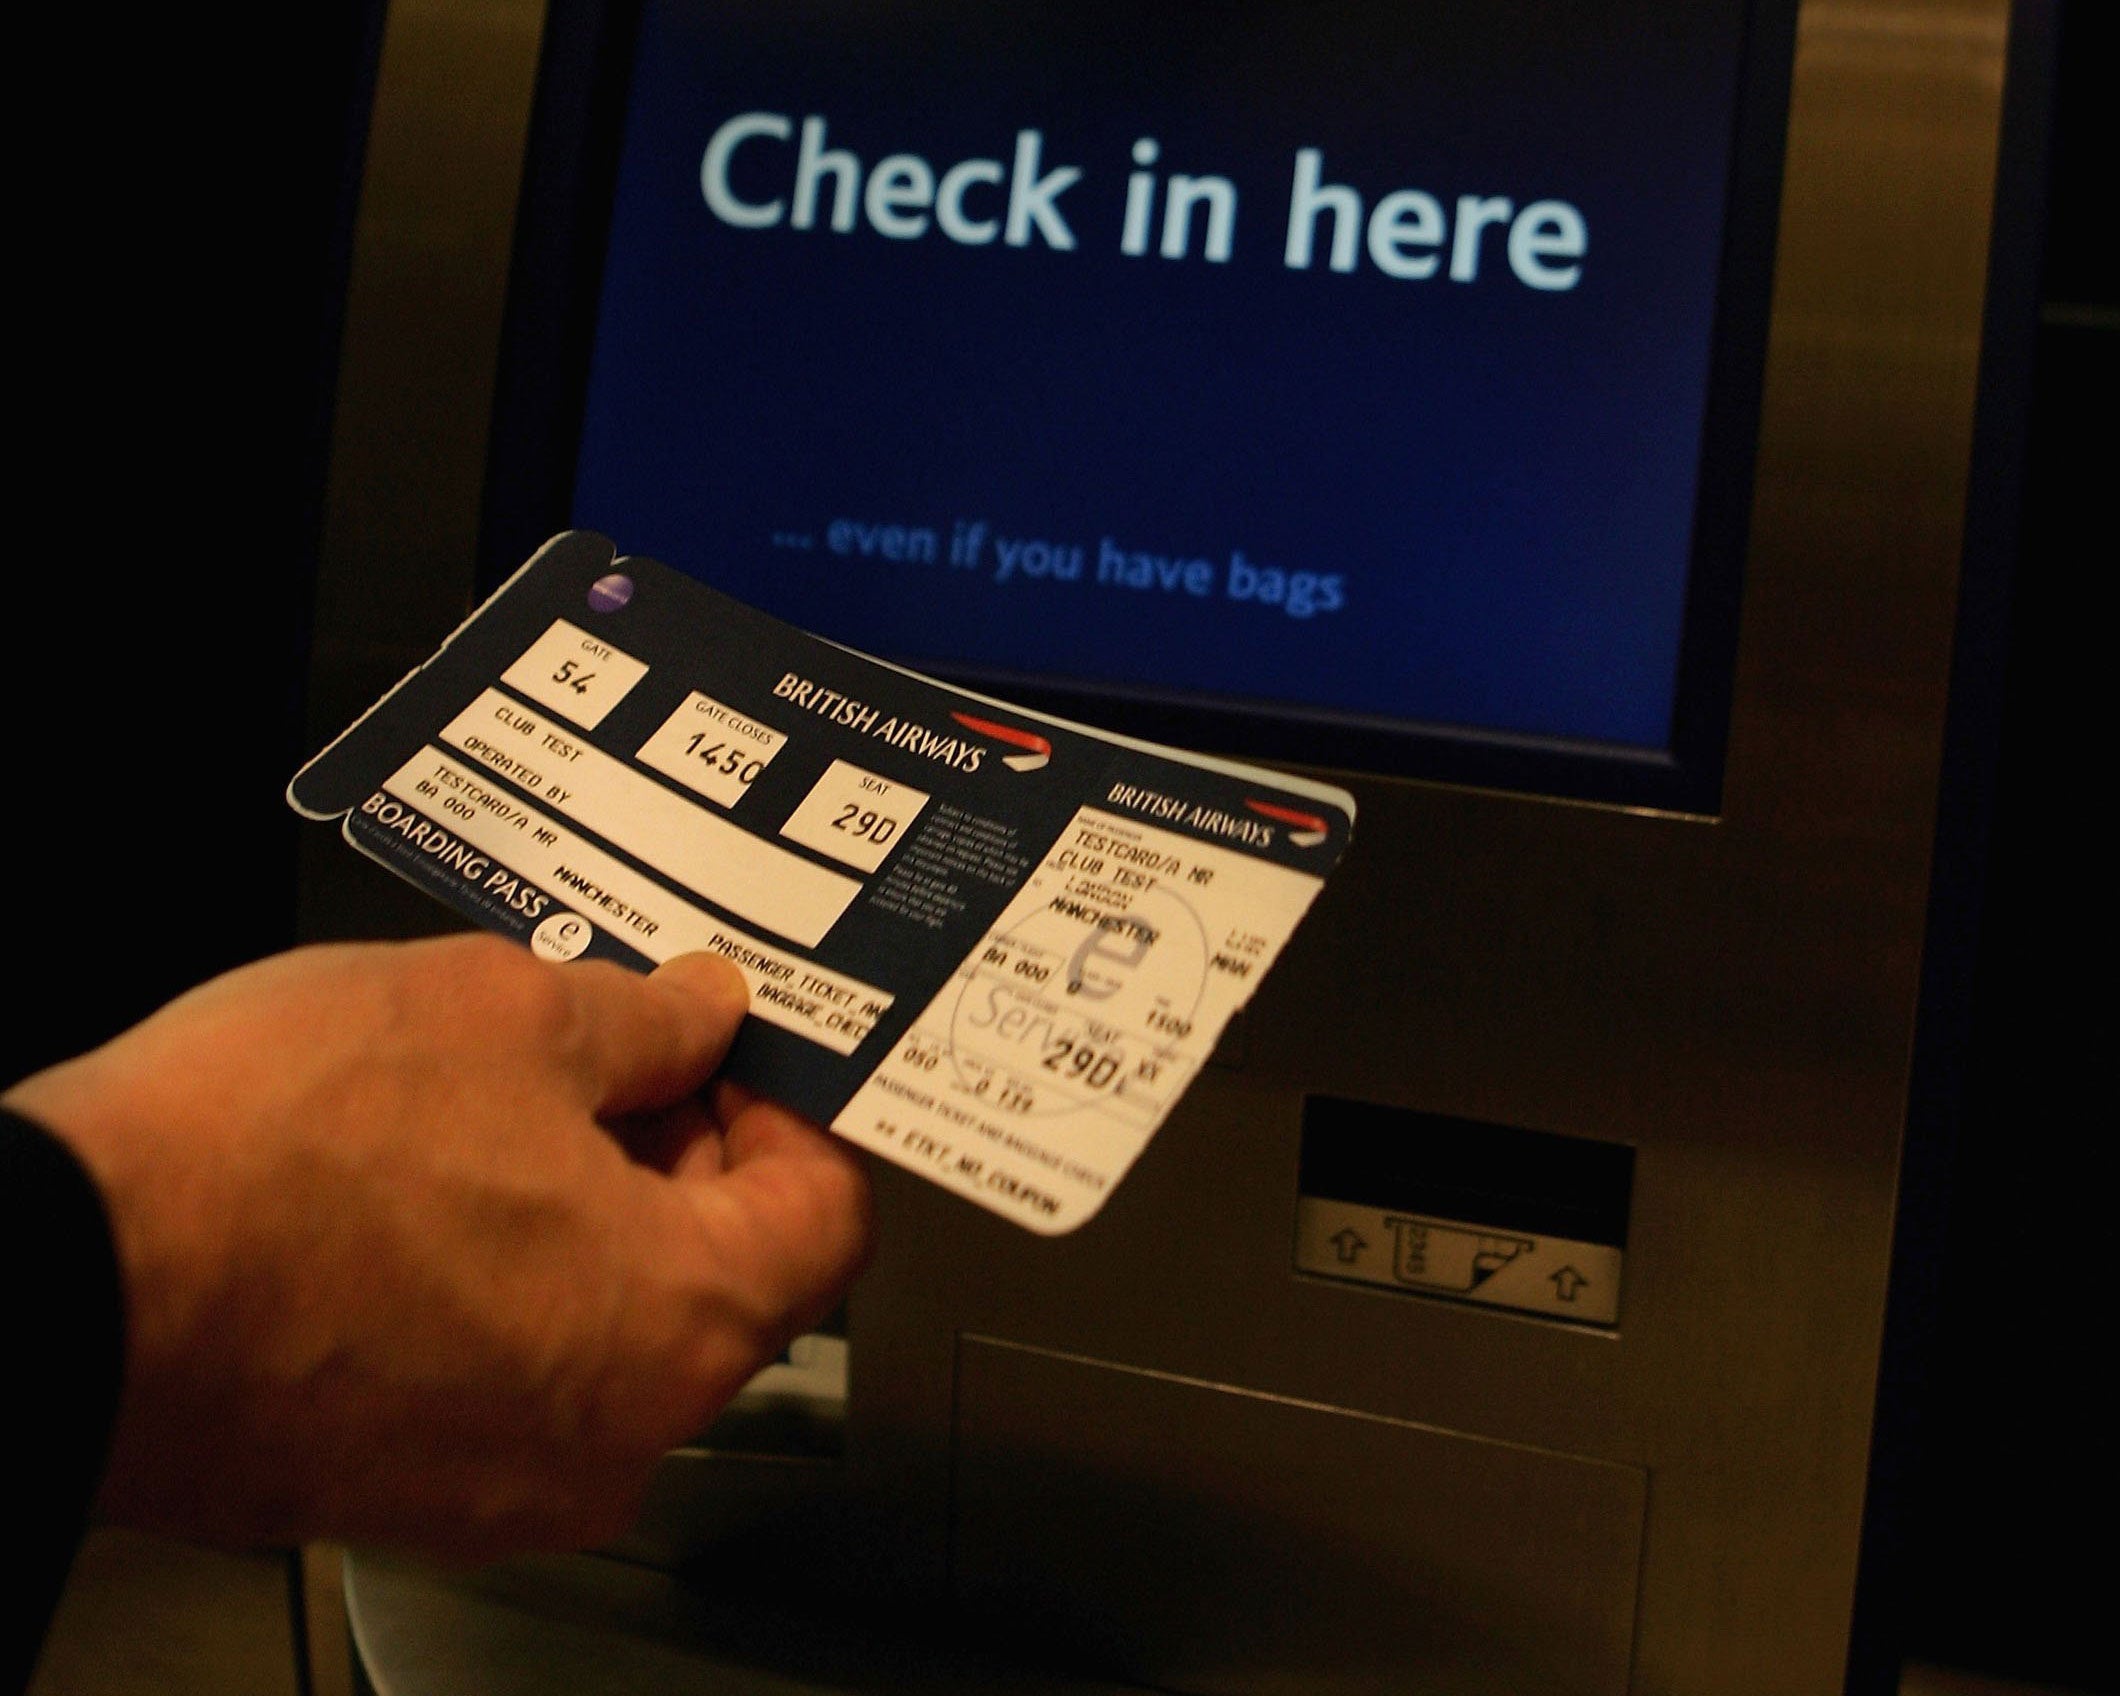 Boarding passes contain passenger information that can be accessed by others